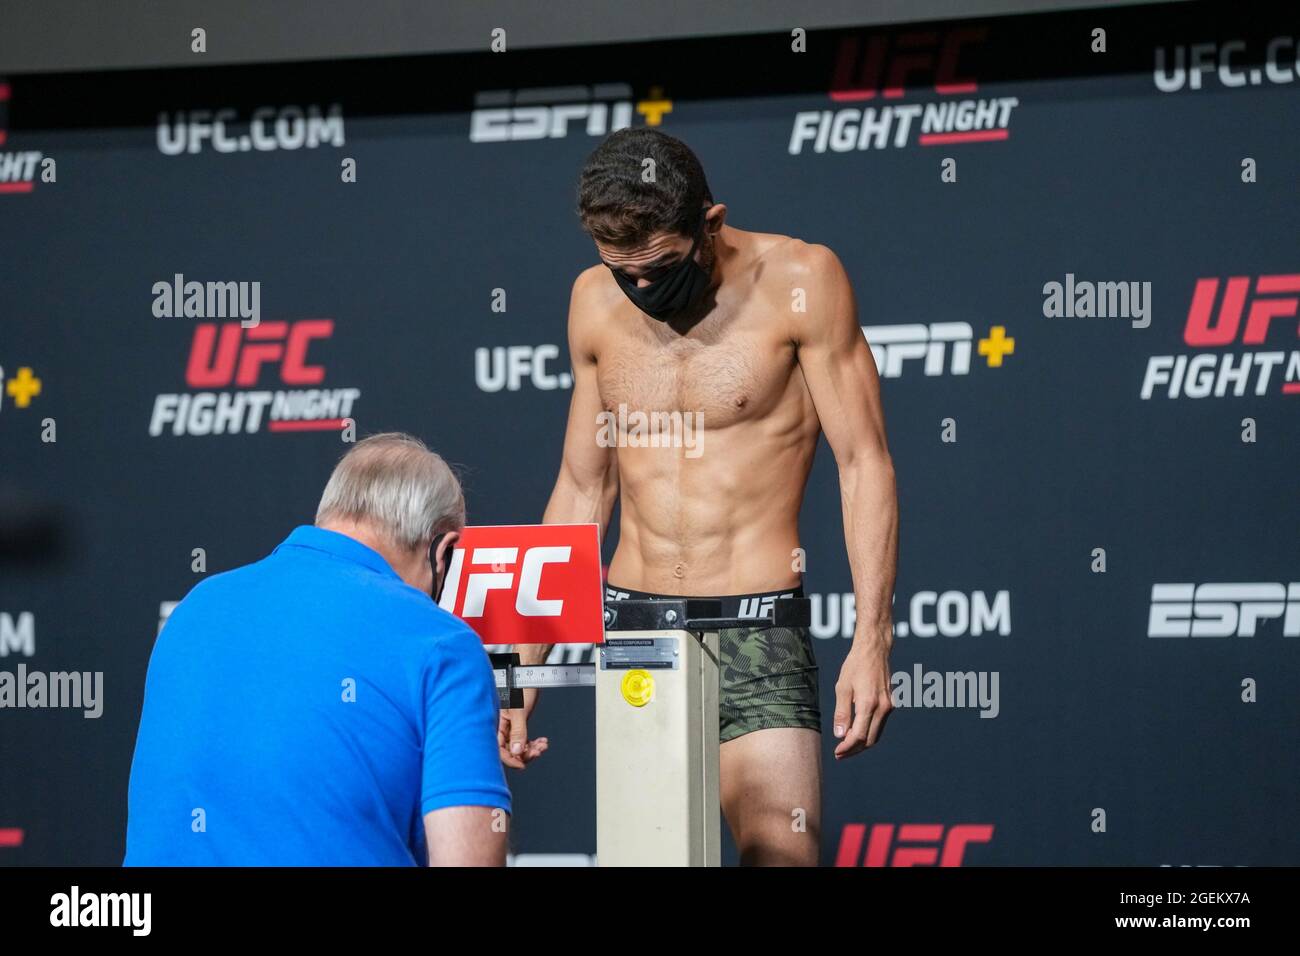 Las Vegas, USA. 20th Aug, 2021. LAS VEGAS, NV - AUGUST 20: Domingo Pilarte steps on the scale for the official weigh-ins at UFC Apex for UFC Fight Night - Vegas 34 - Weigh-ins on August 20, 2021 in Las Vegas, NV, United States. (Photo by Louis Grasse/PxImages) Credit: Px Images/Alamy Live News Stock Photo